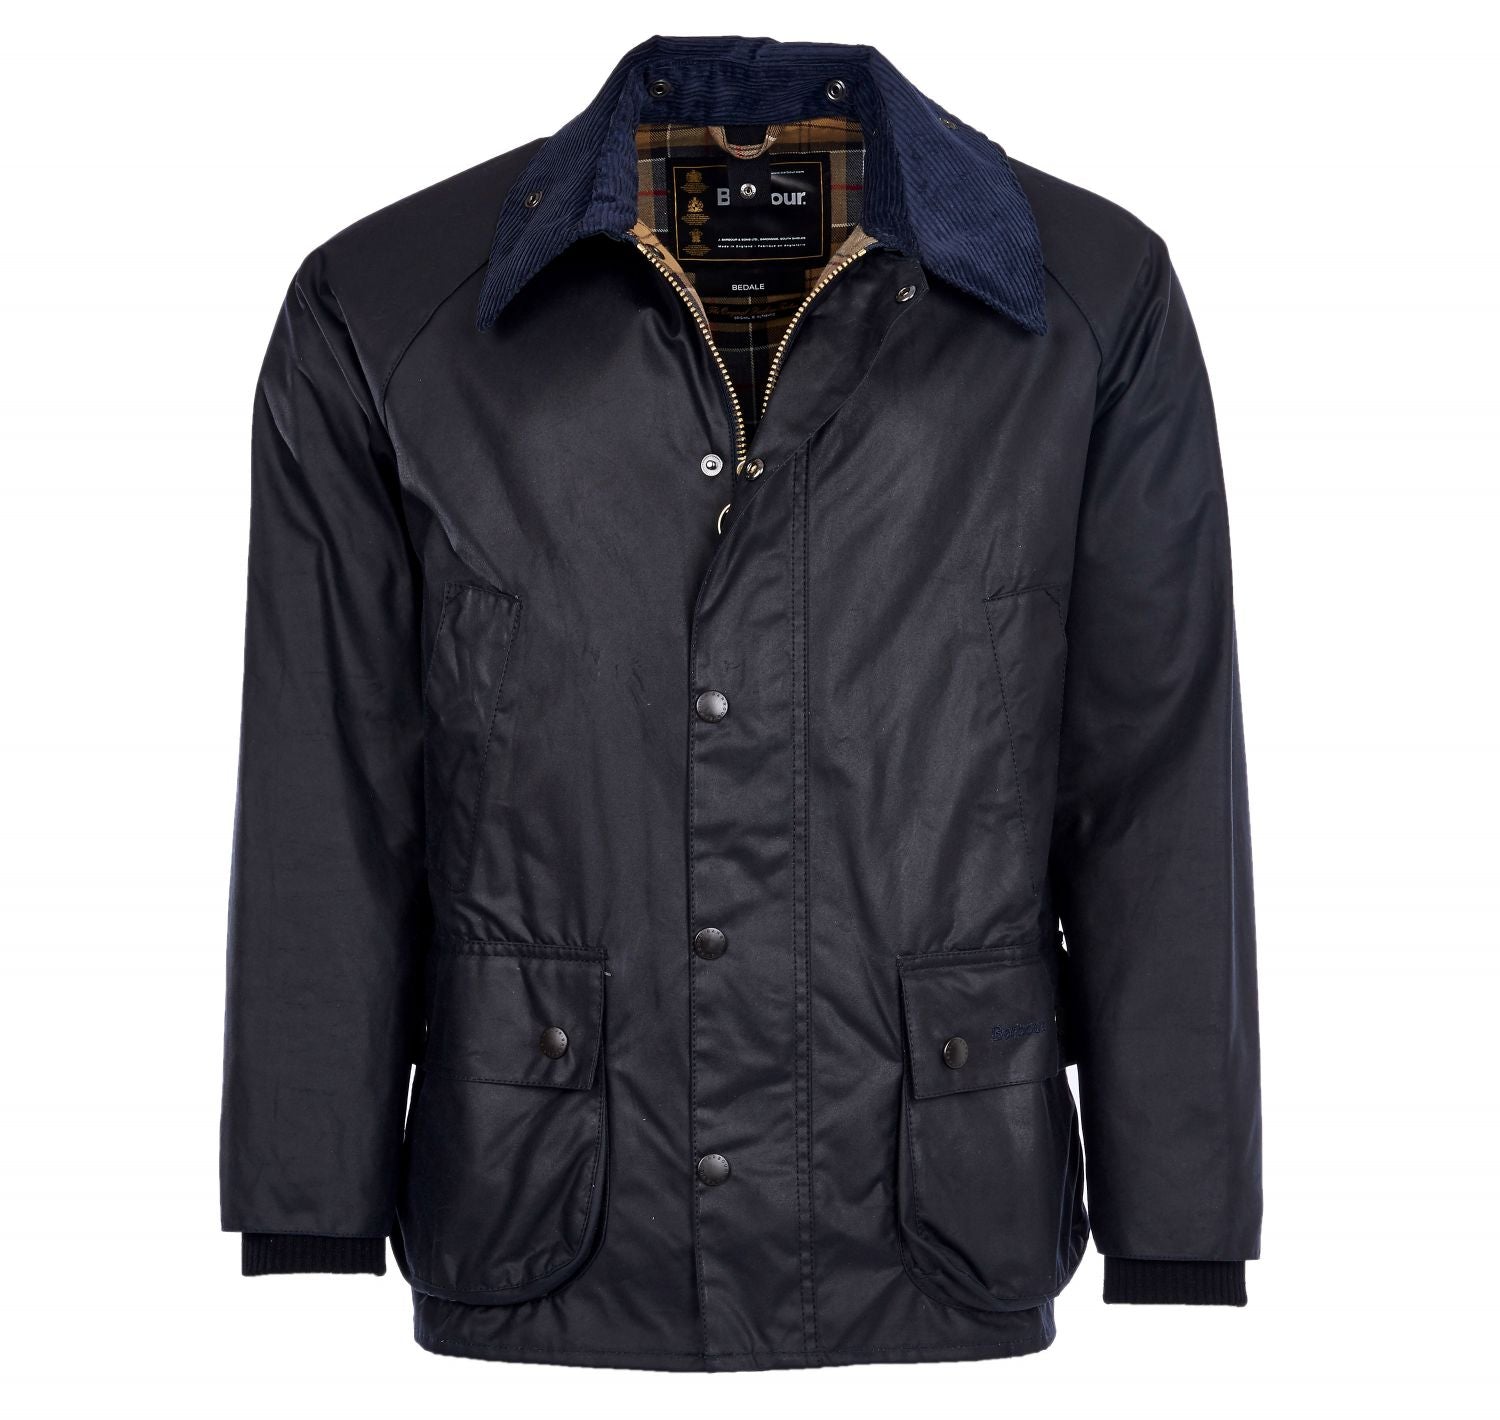 Barbour Classic Bedale Jacket in Navy